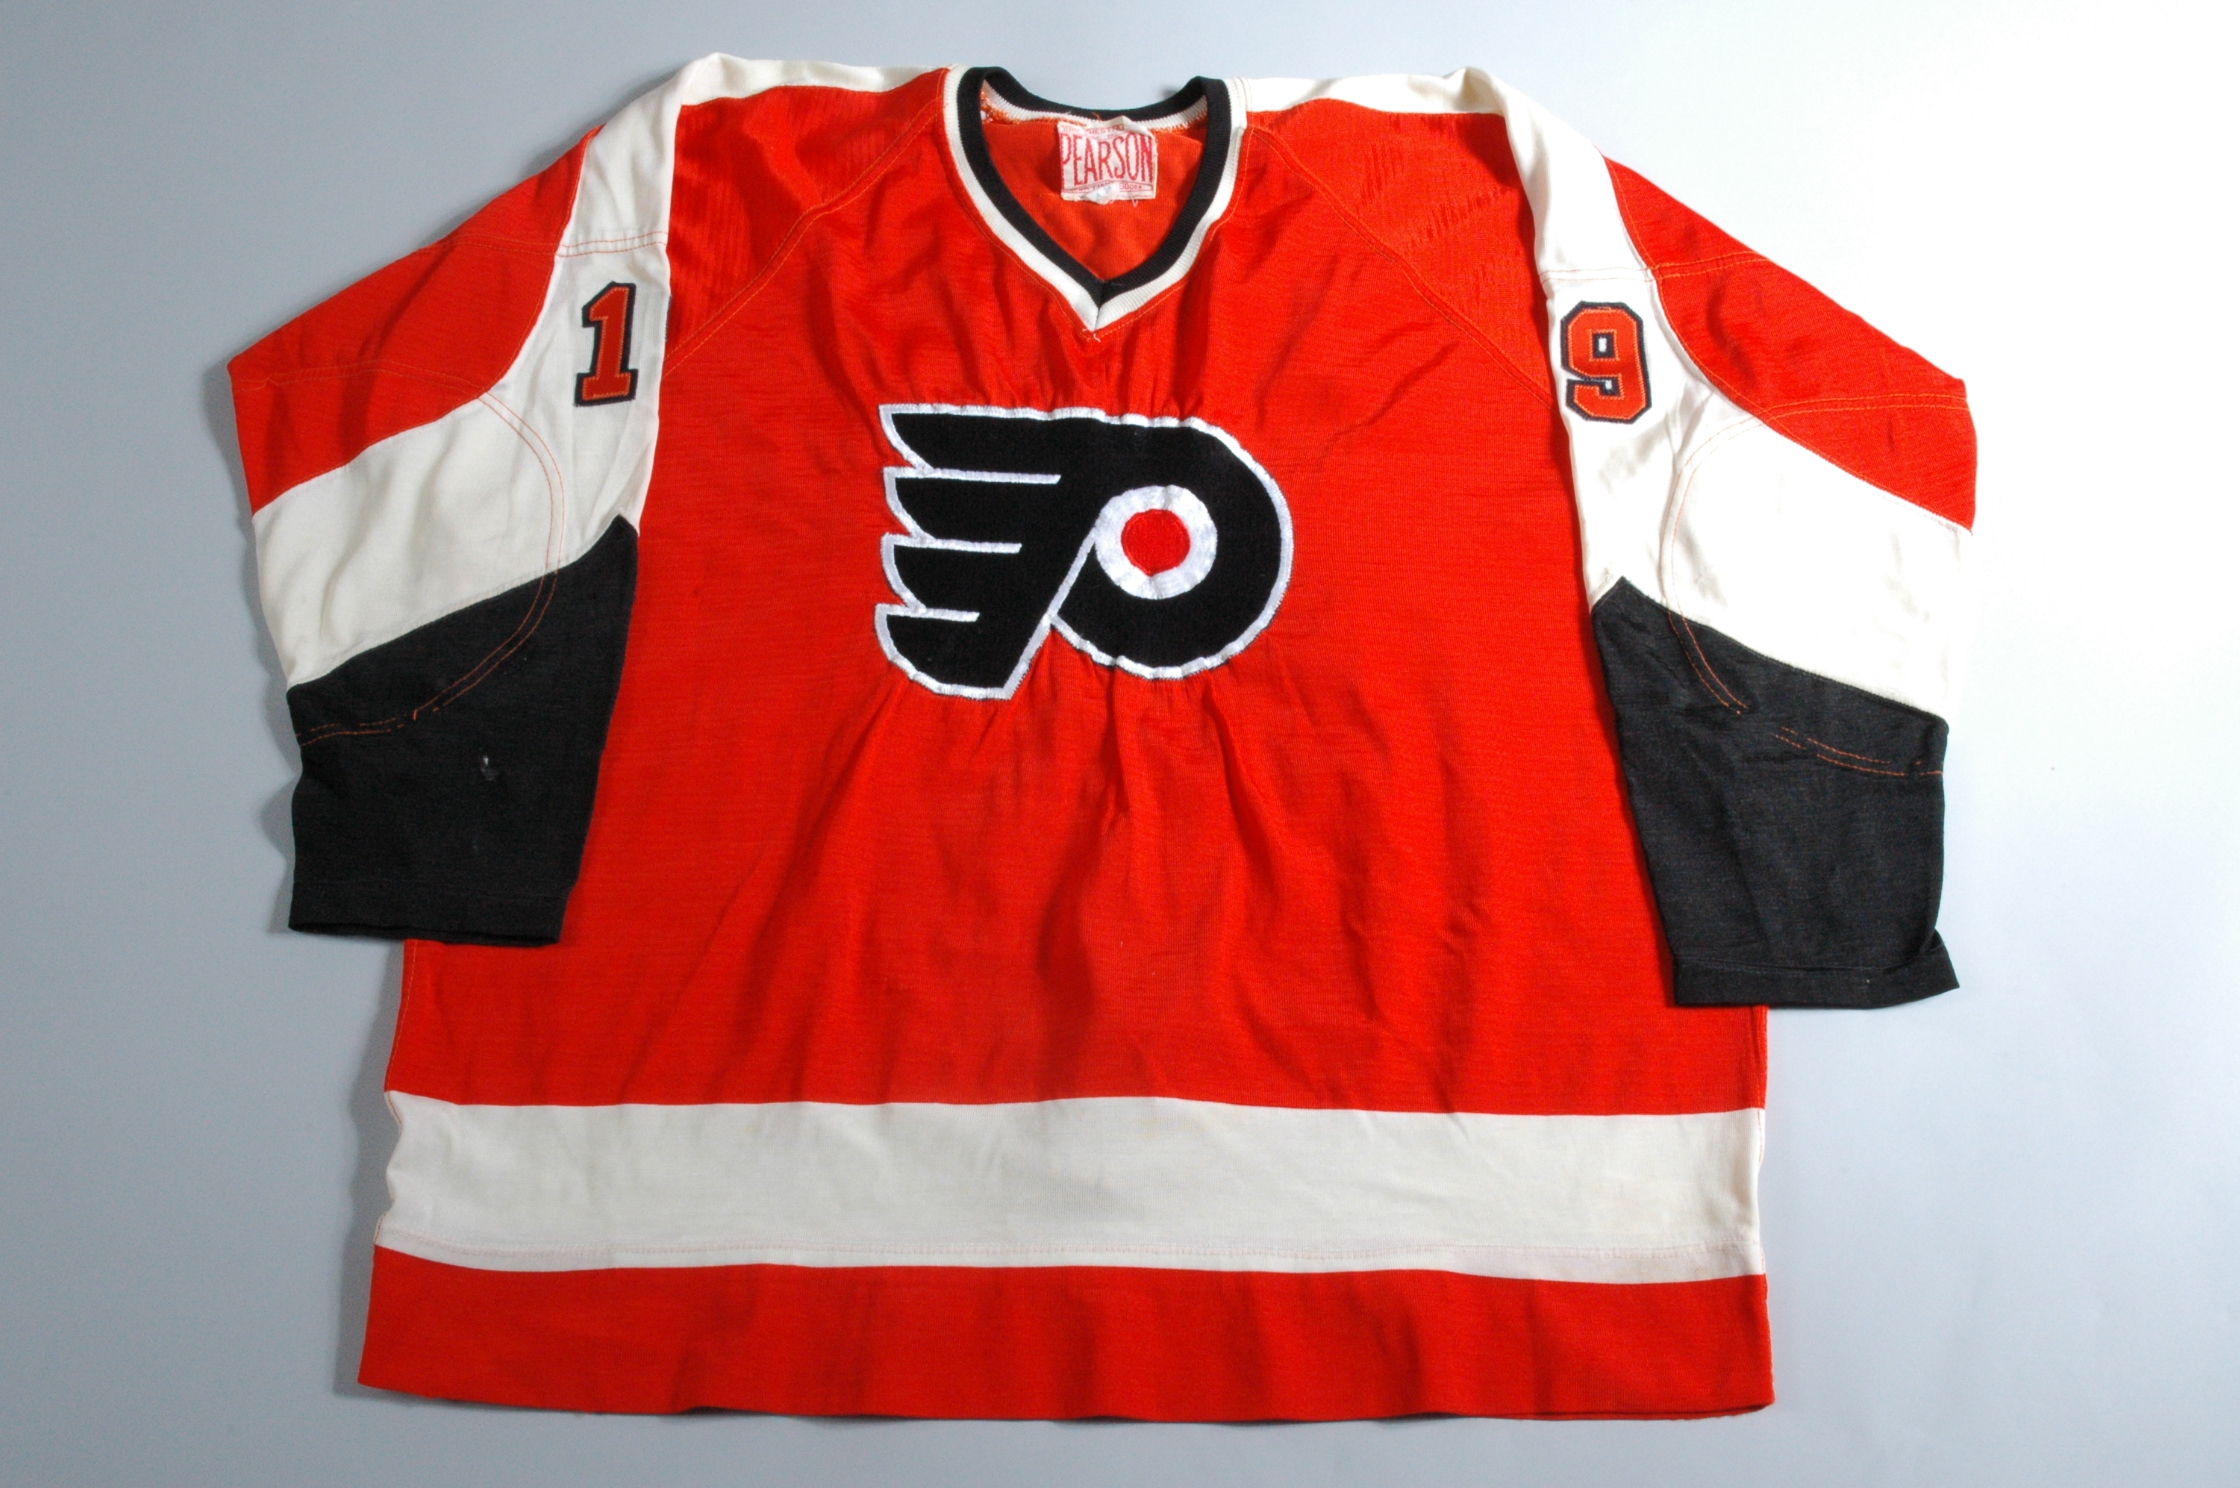 1998-99 Eric Lindros Philadelphia Flyers Game Worn Jersey - All